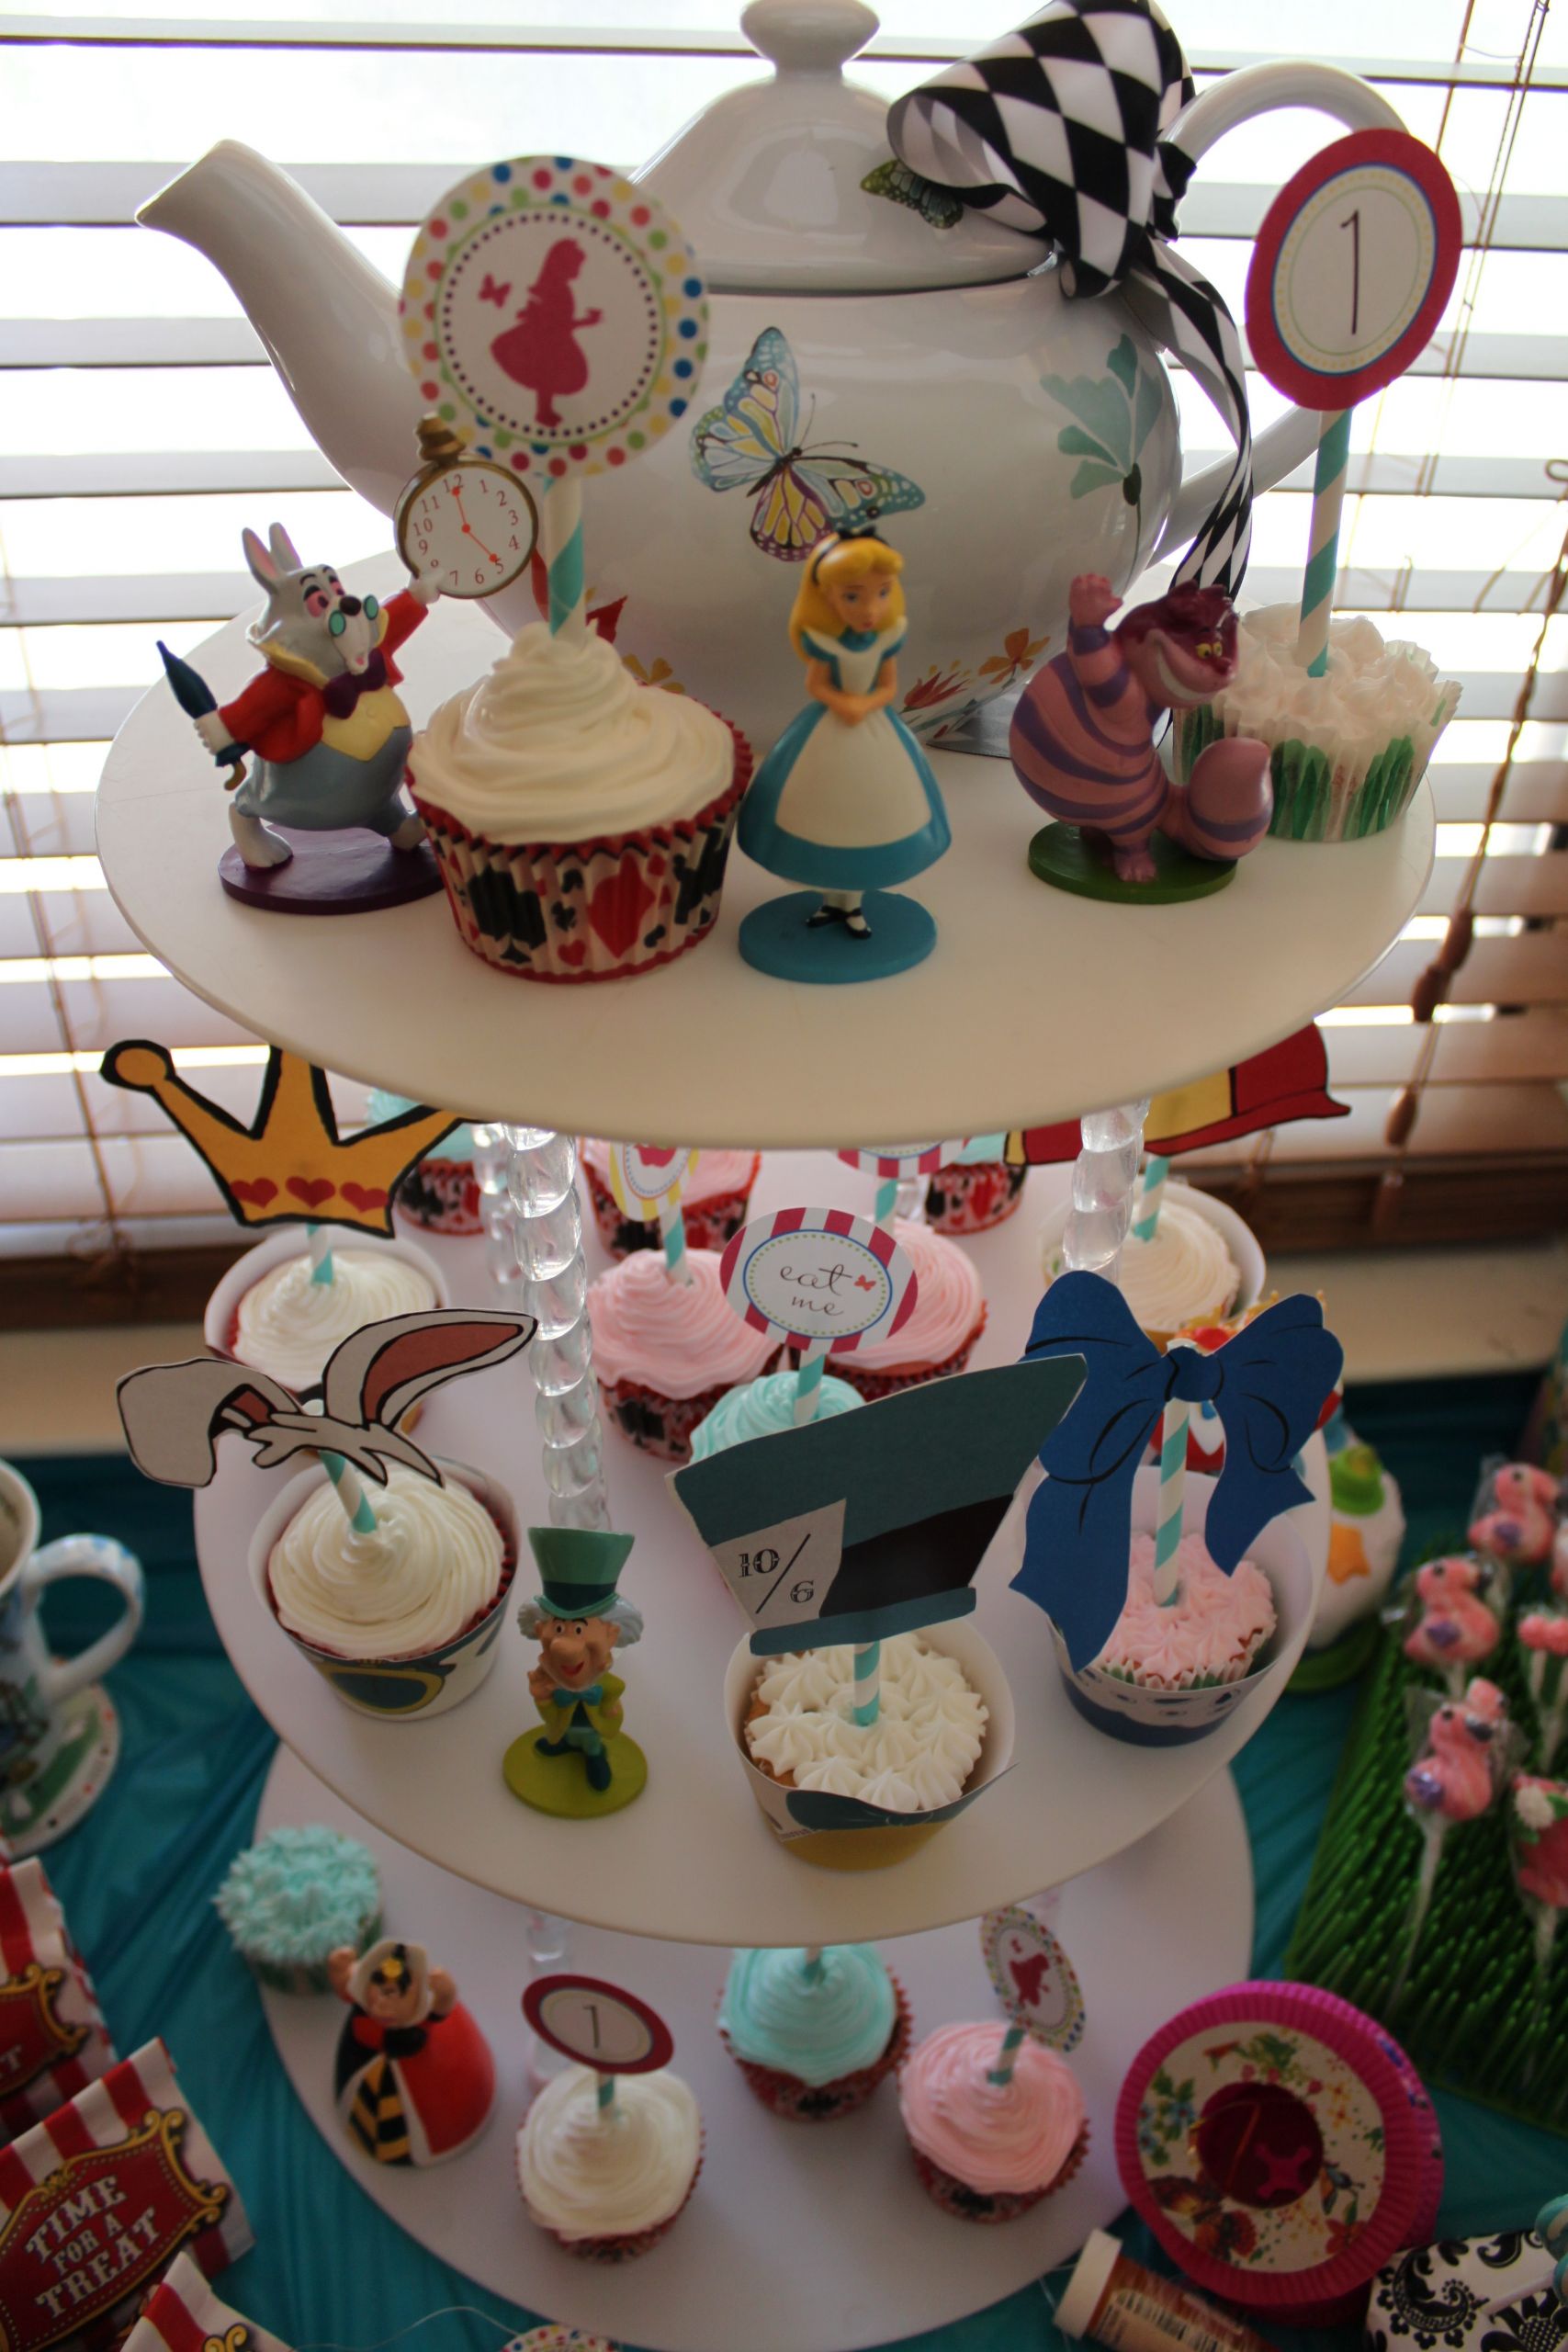 Birthday Party Decor
 e Year Old Birthday Party Alice in “ e”derland Theme